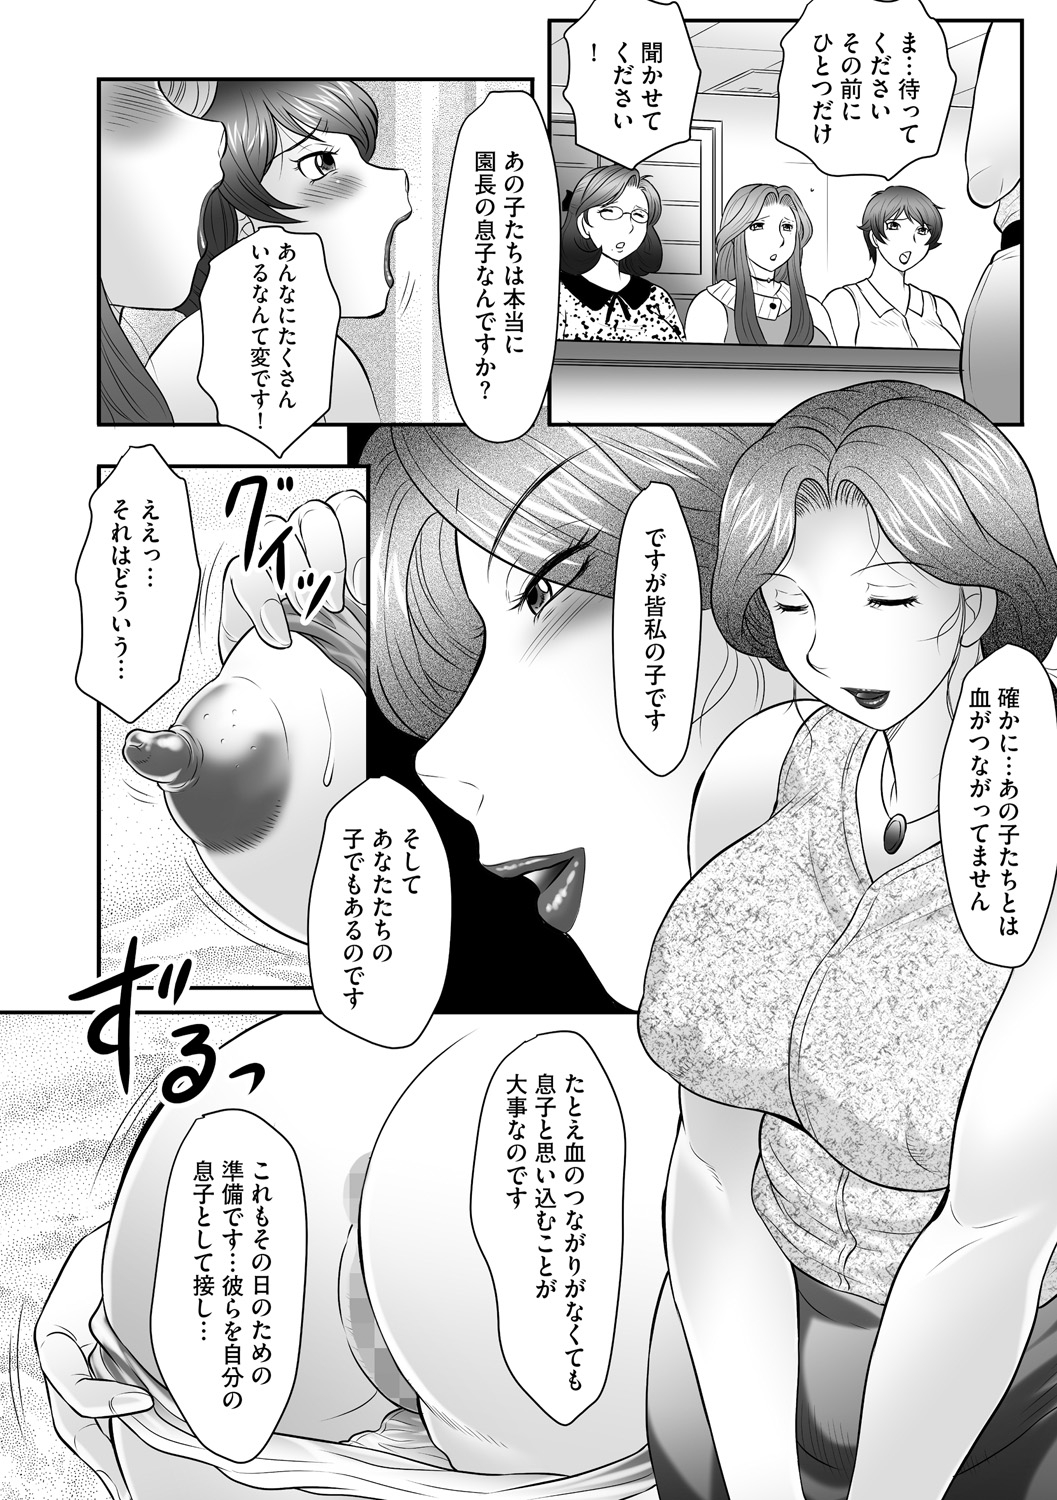 [Fuusen Club] Boshi no Susume - The advice of the mother and child Ch. 6 page 10 full